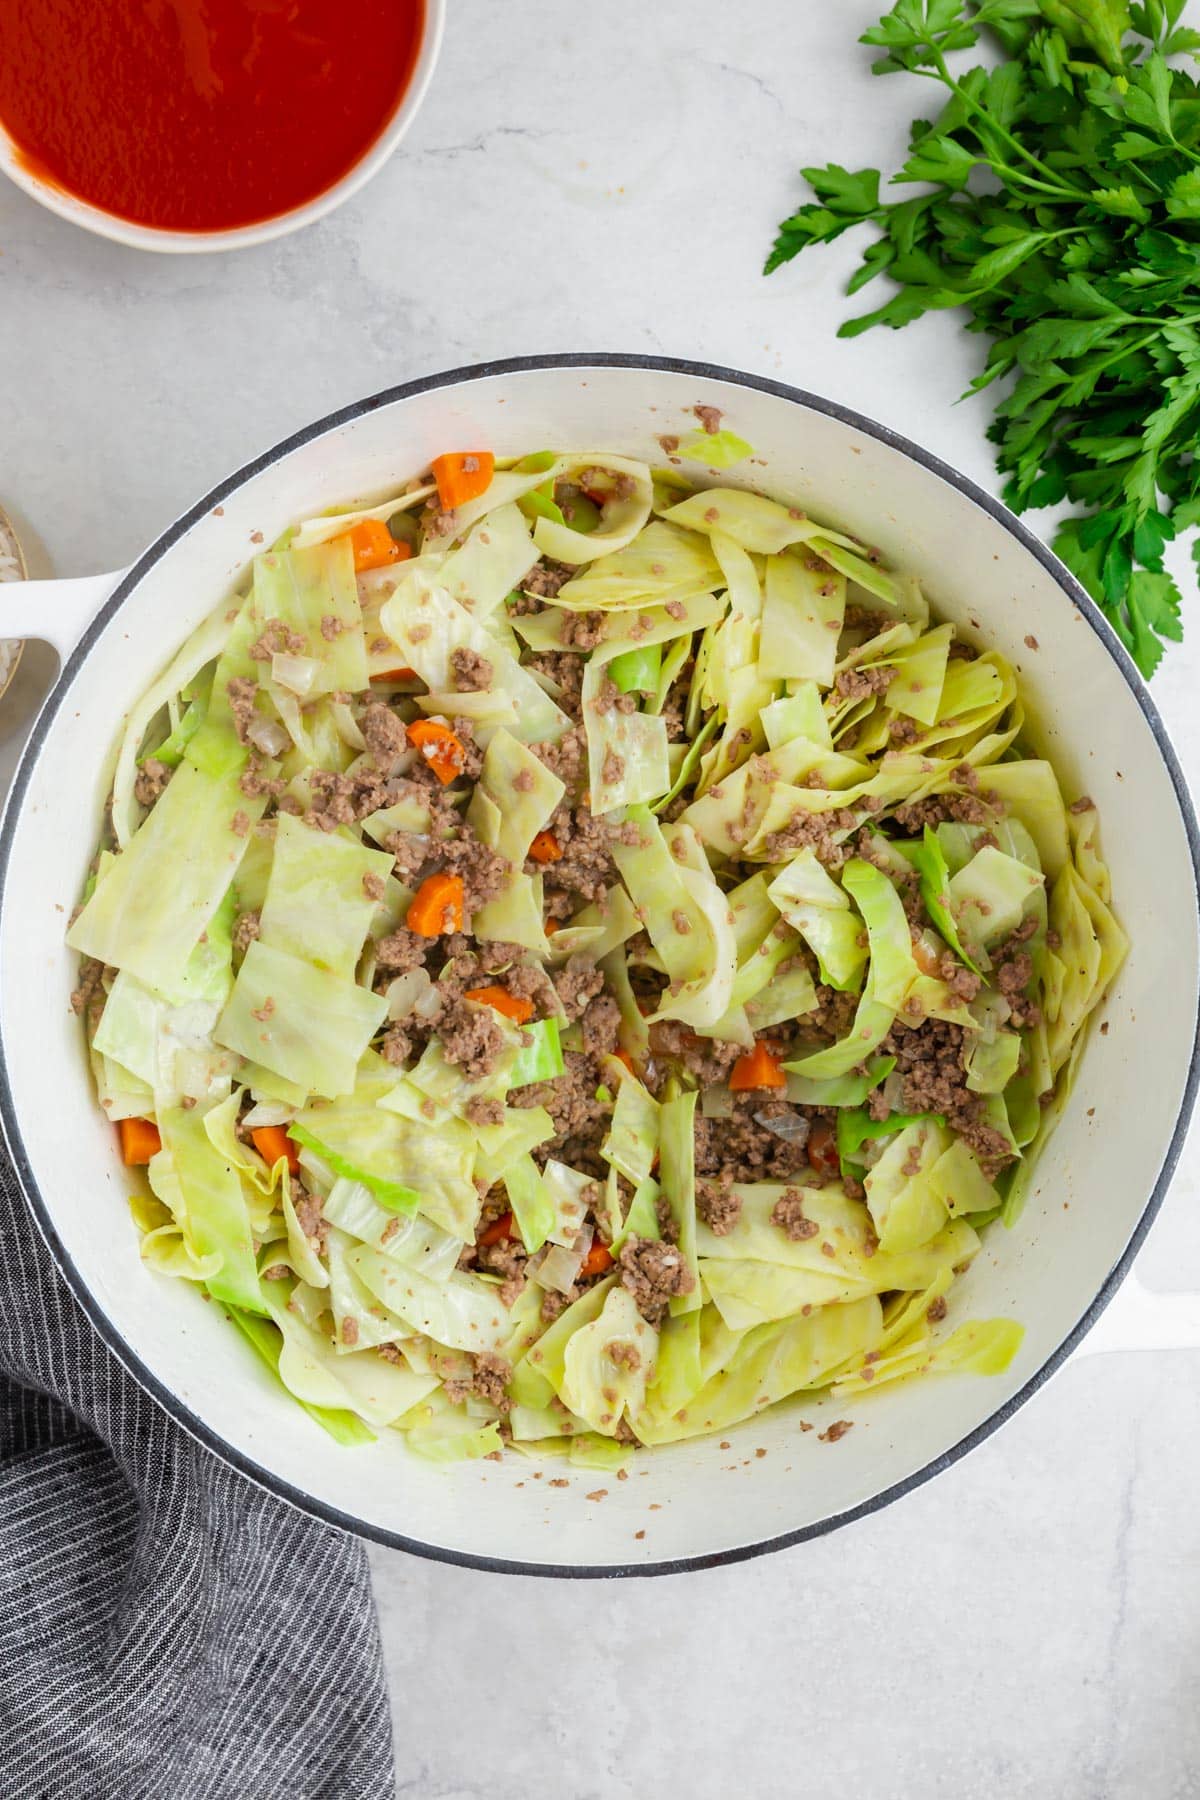 A dutch oven of cooked ground beef, diced carrots and shredded cabbage that have been mixed together.